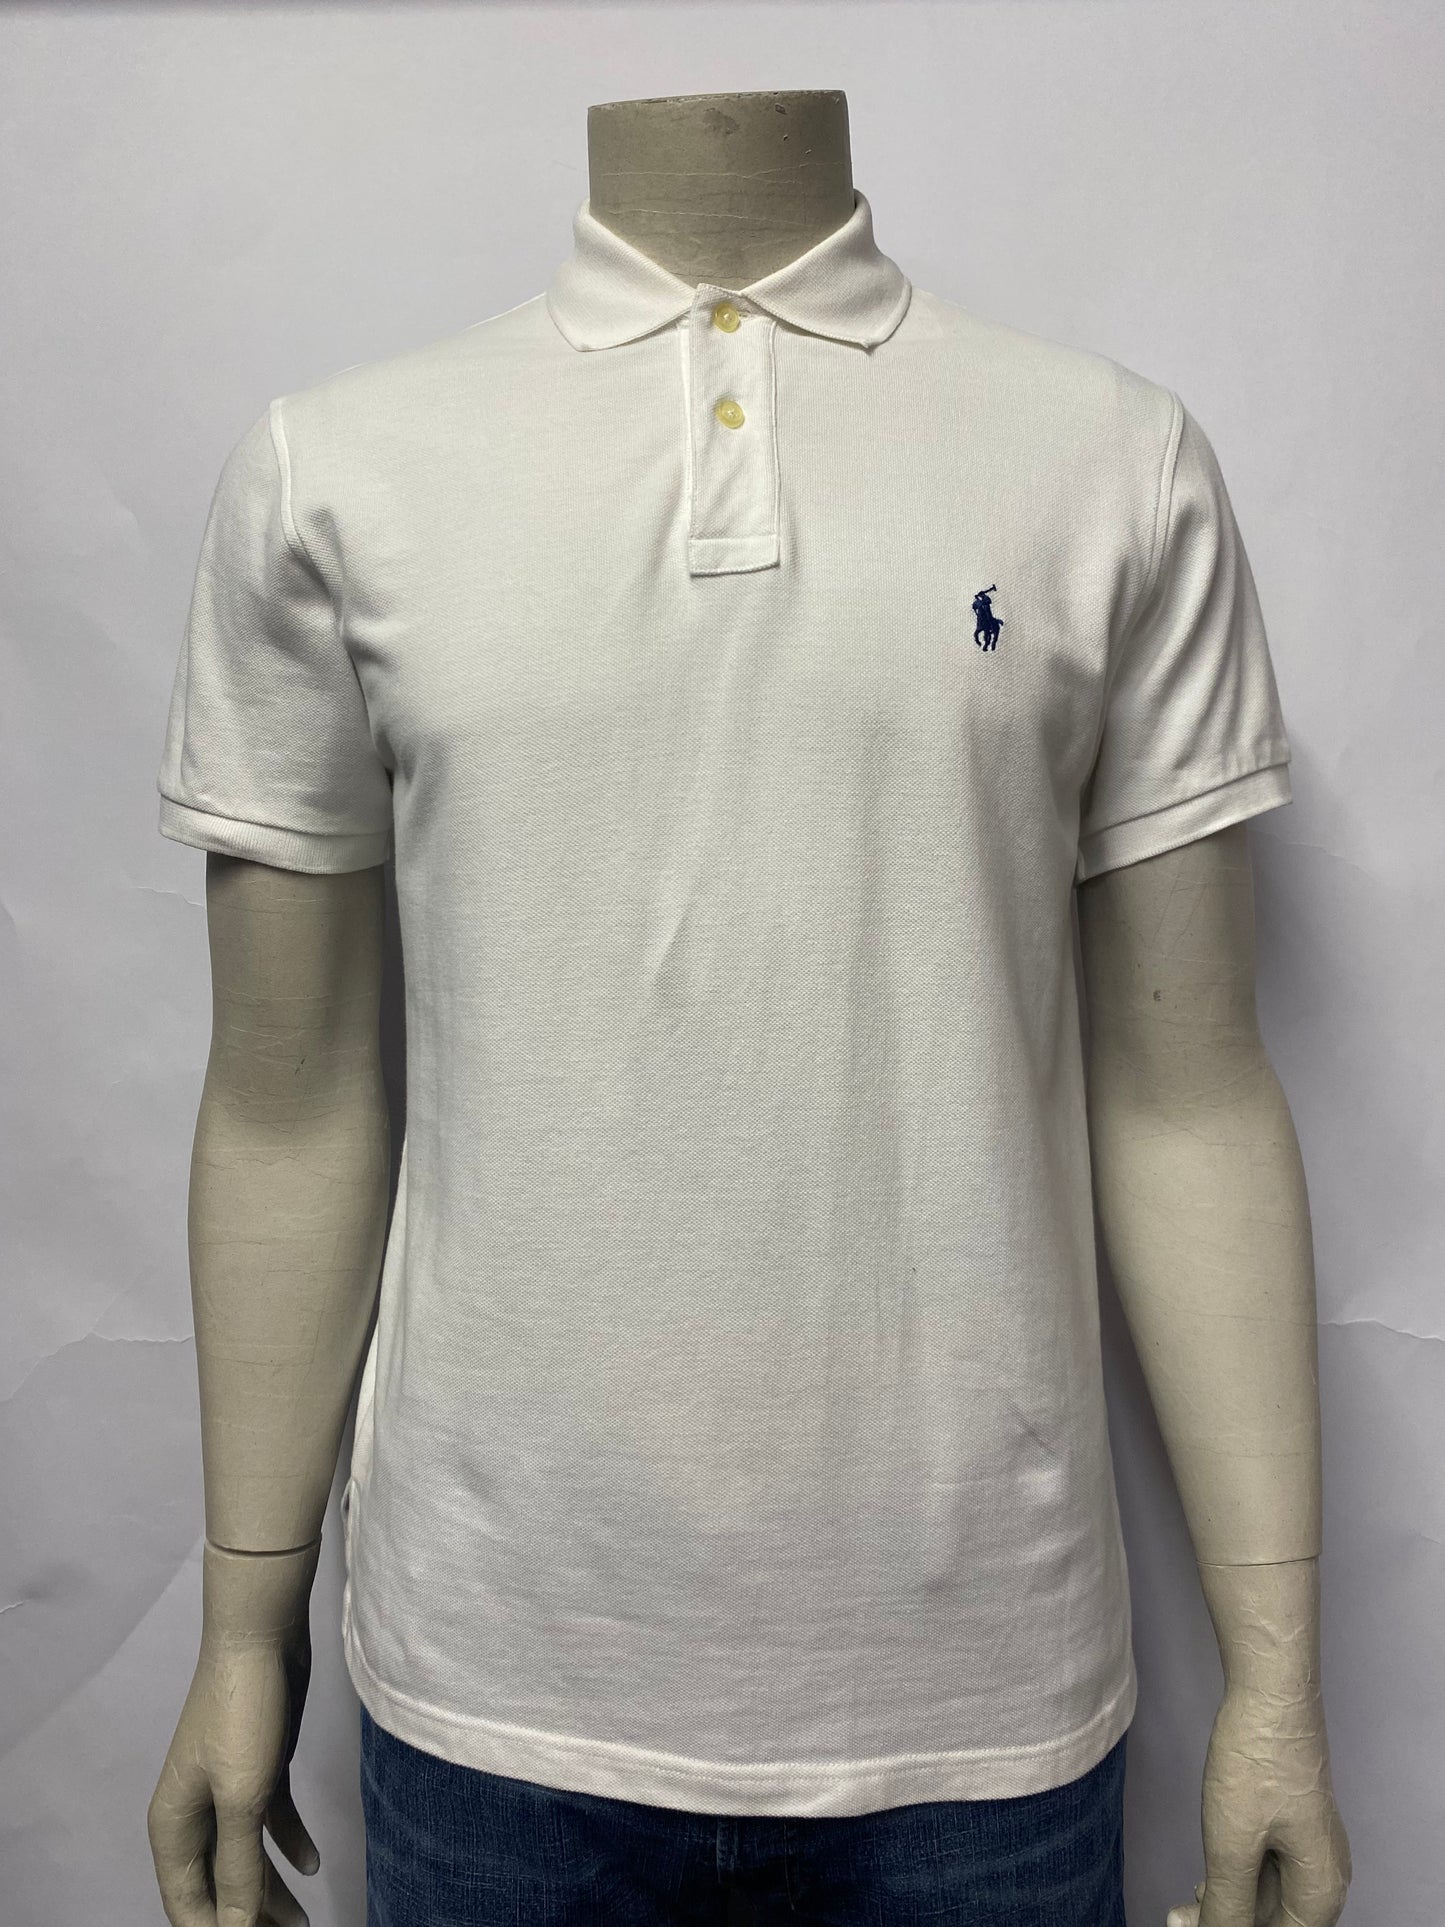 Polo Ralph Lauren White Polo Top Custom Fit Large